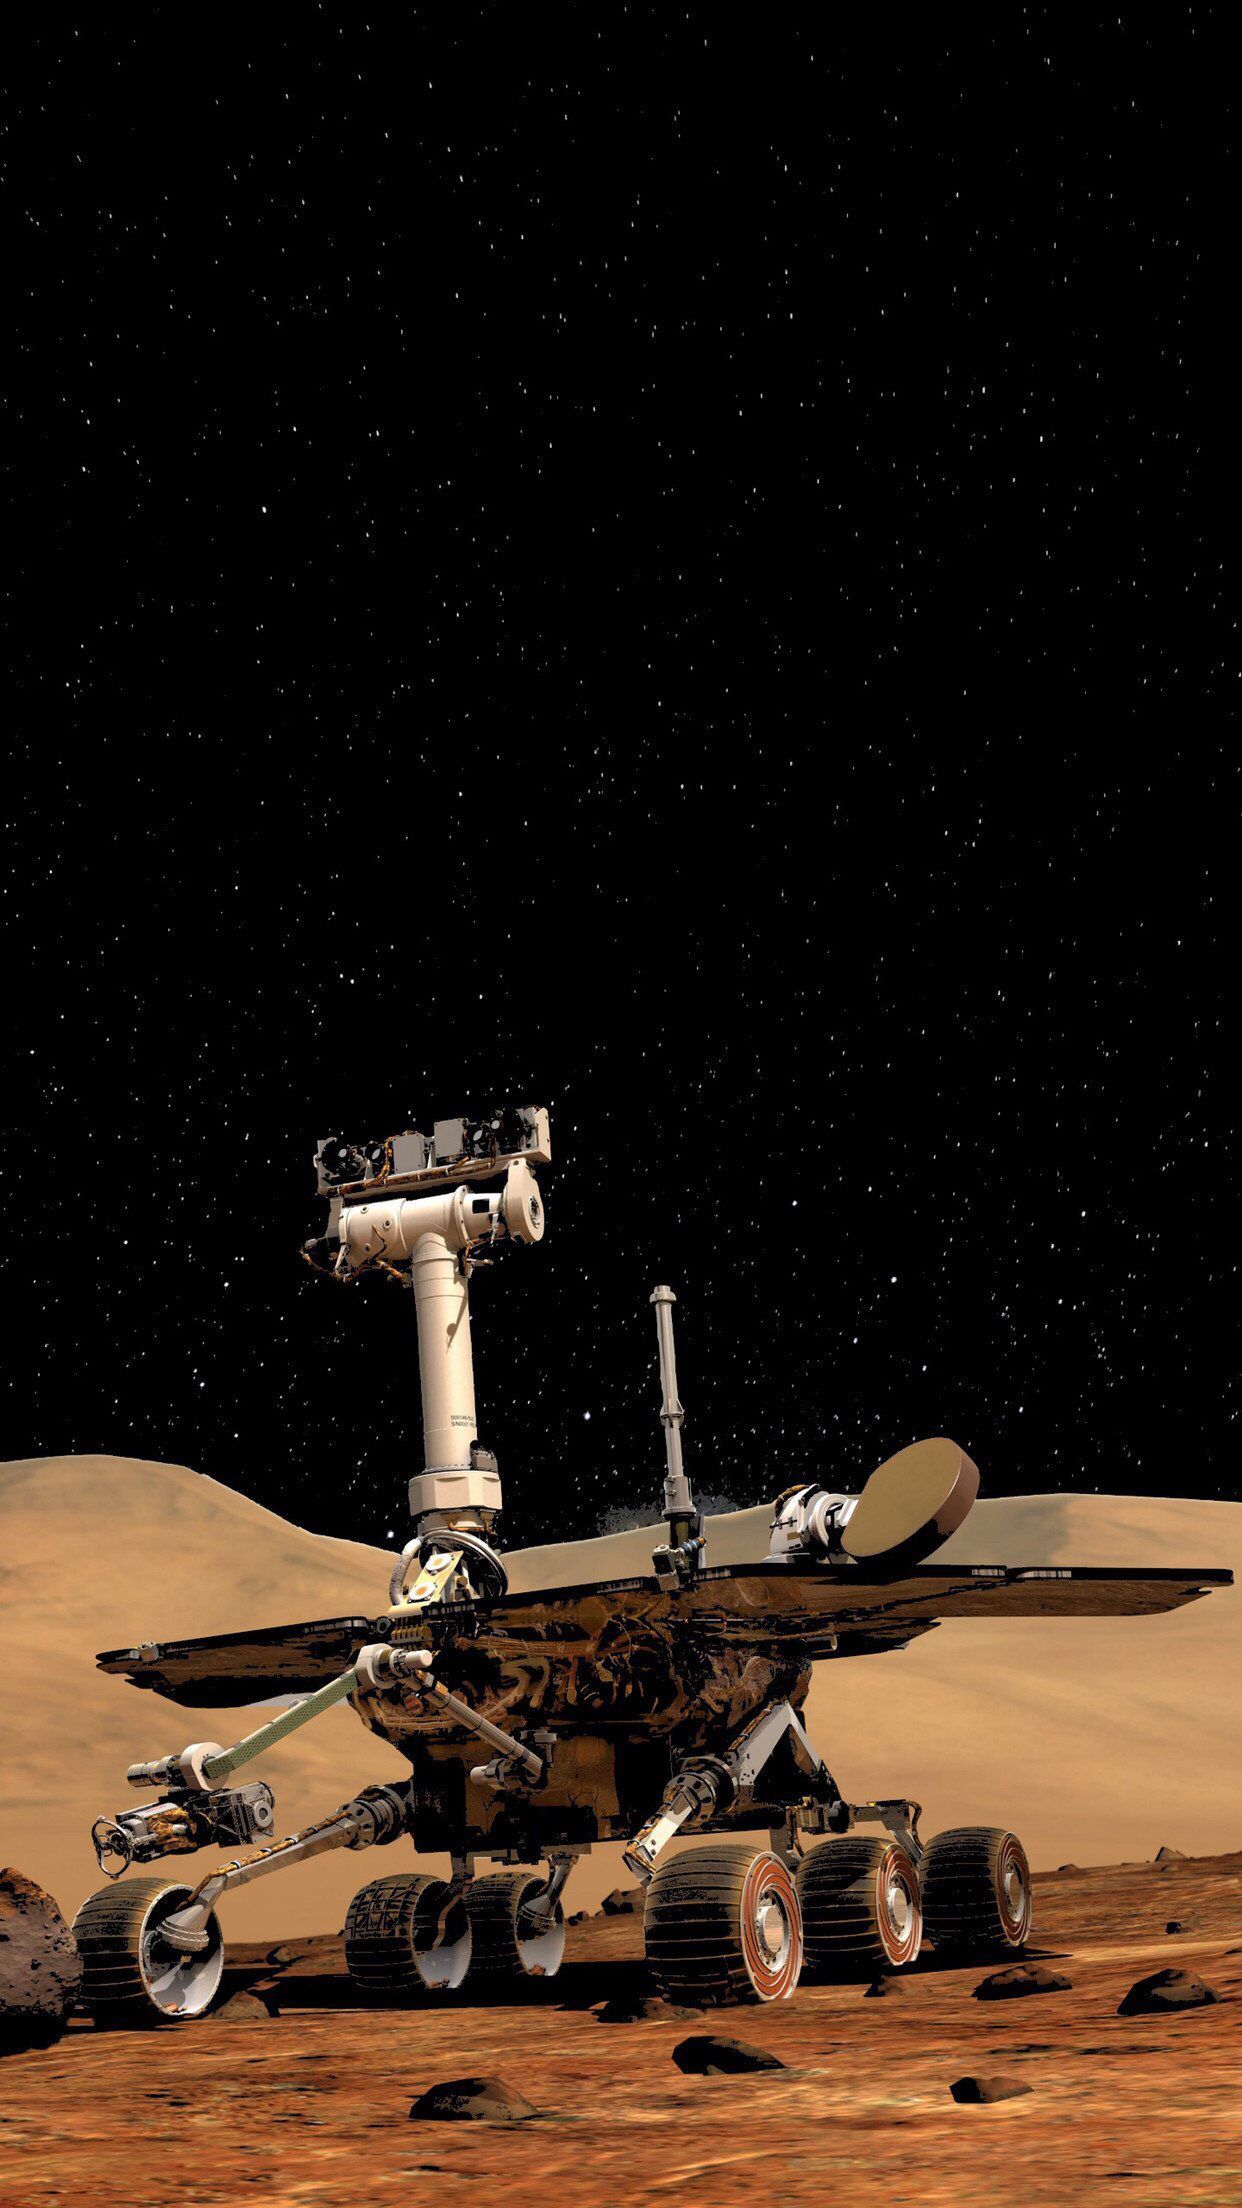 Curiosity Rover Wallpapers